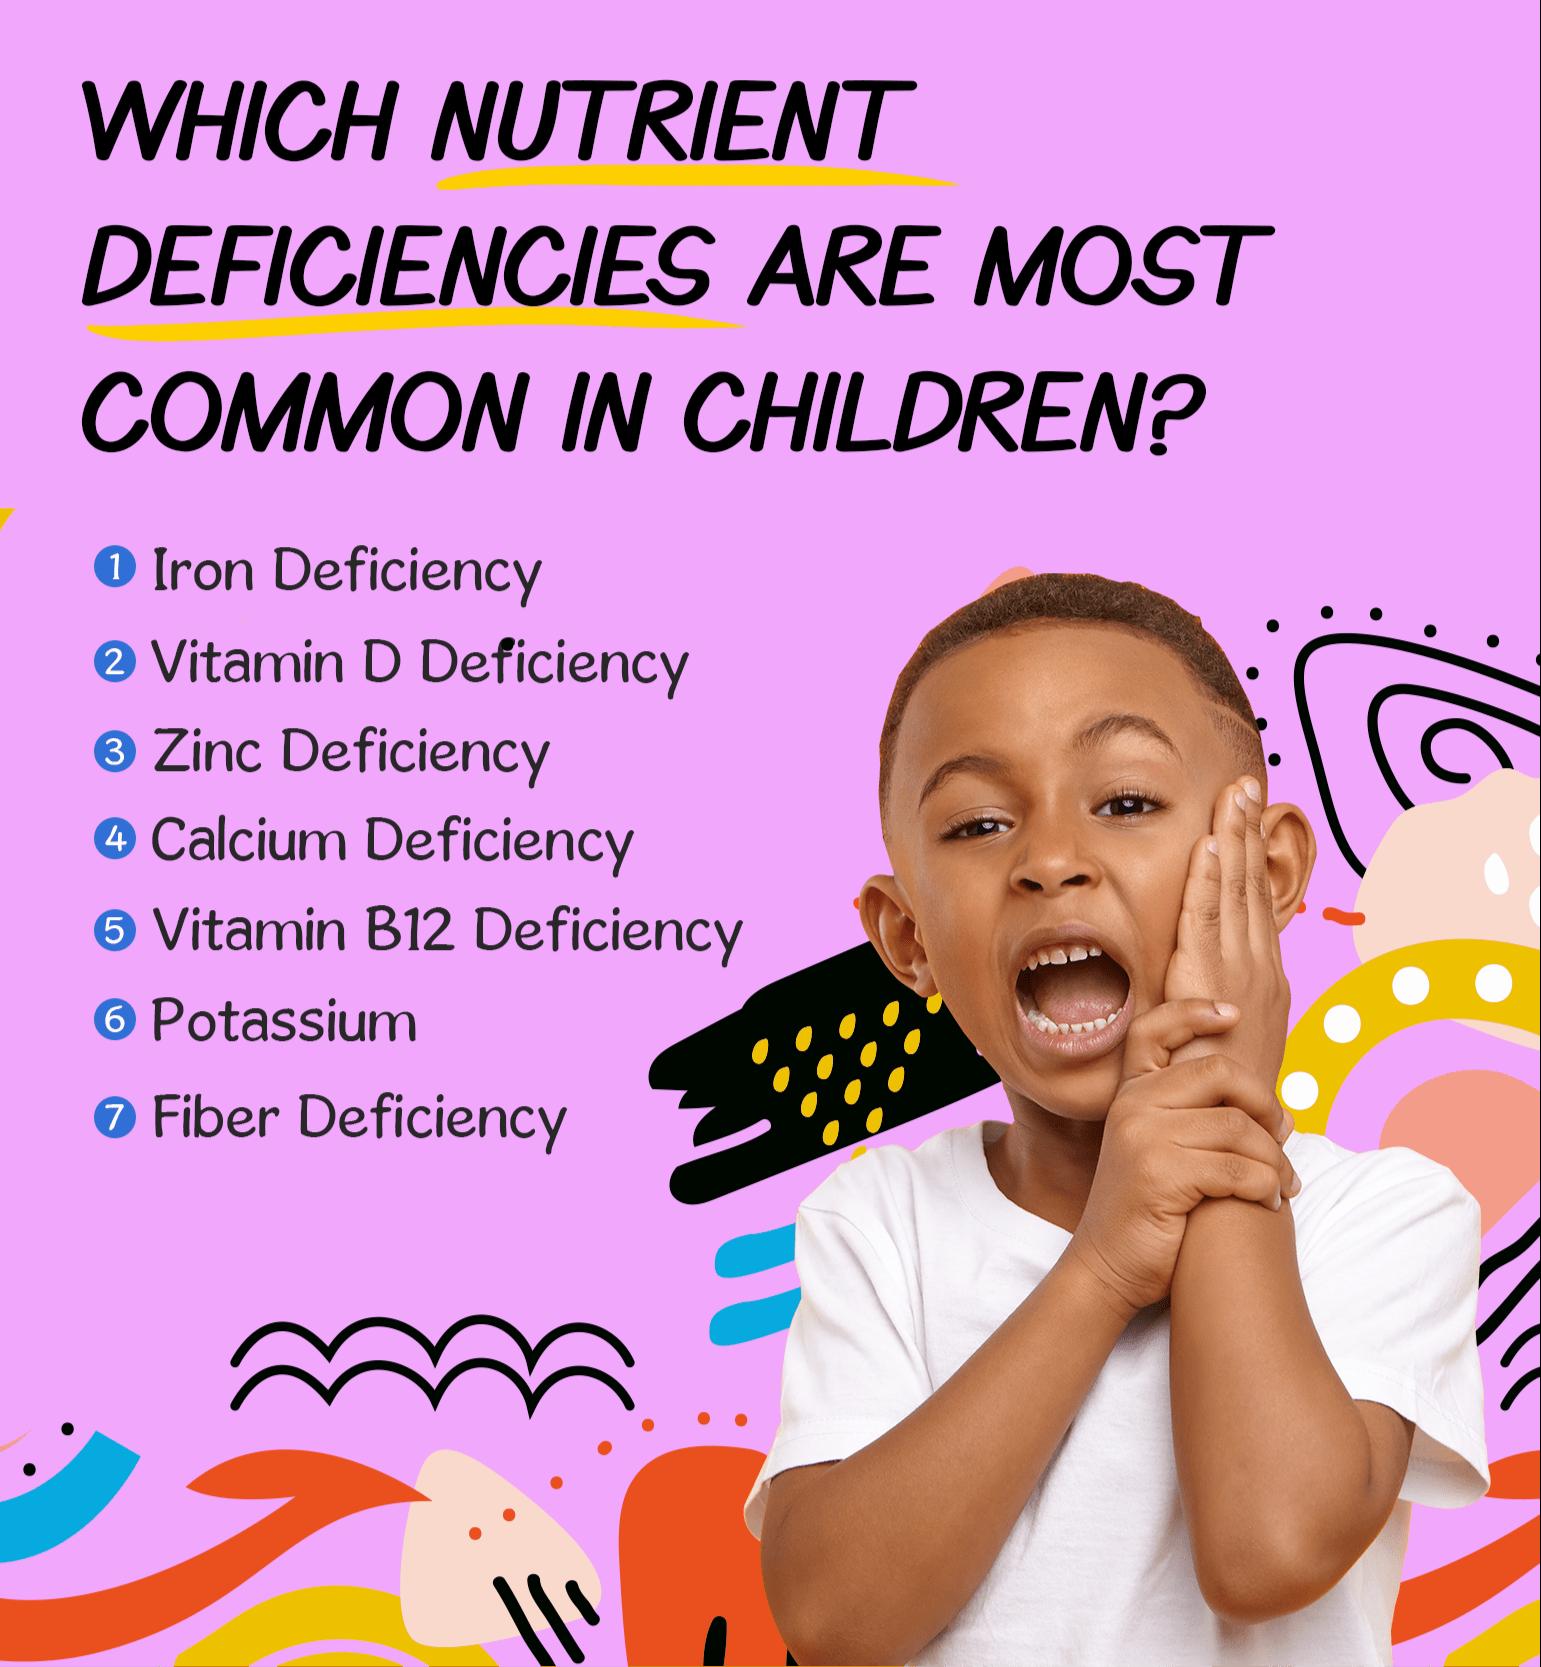 A young boy holds his cheek with his hand, with a list of the most common nutrient deficiencies in children next to him.